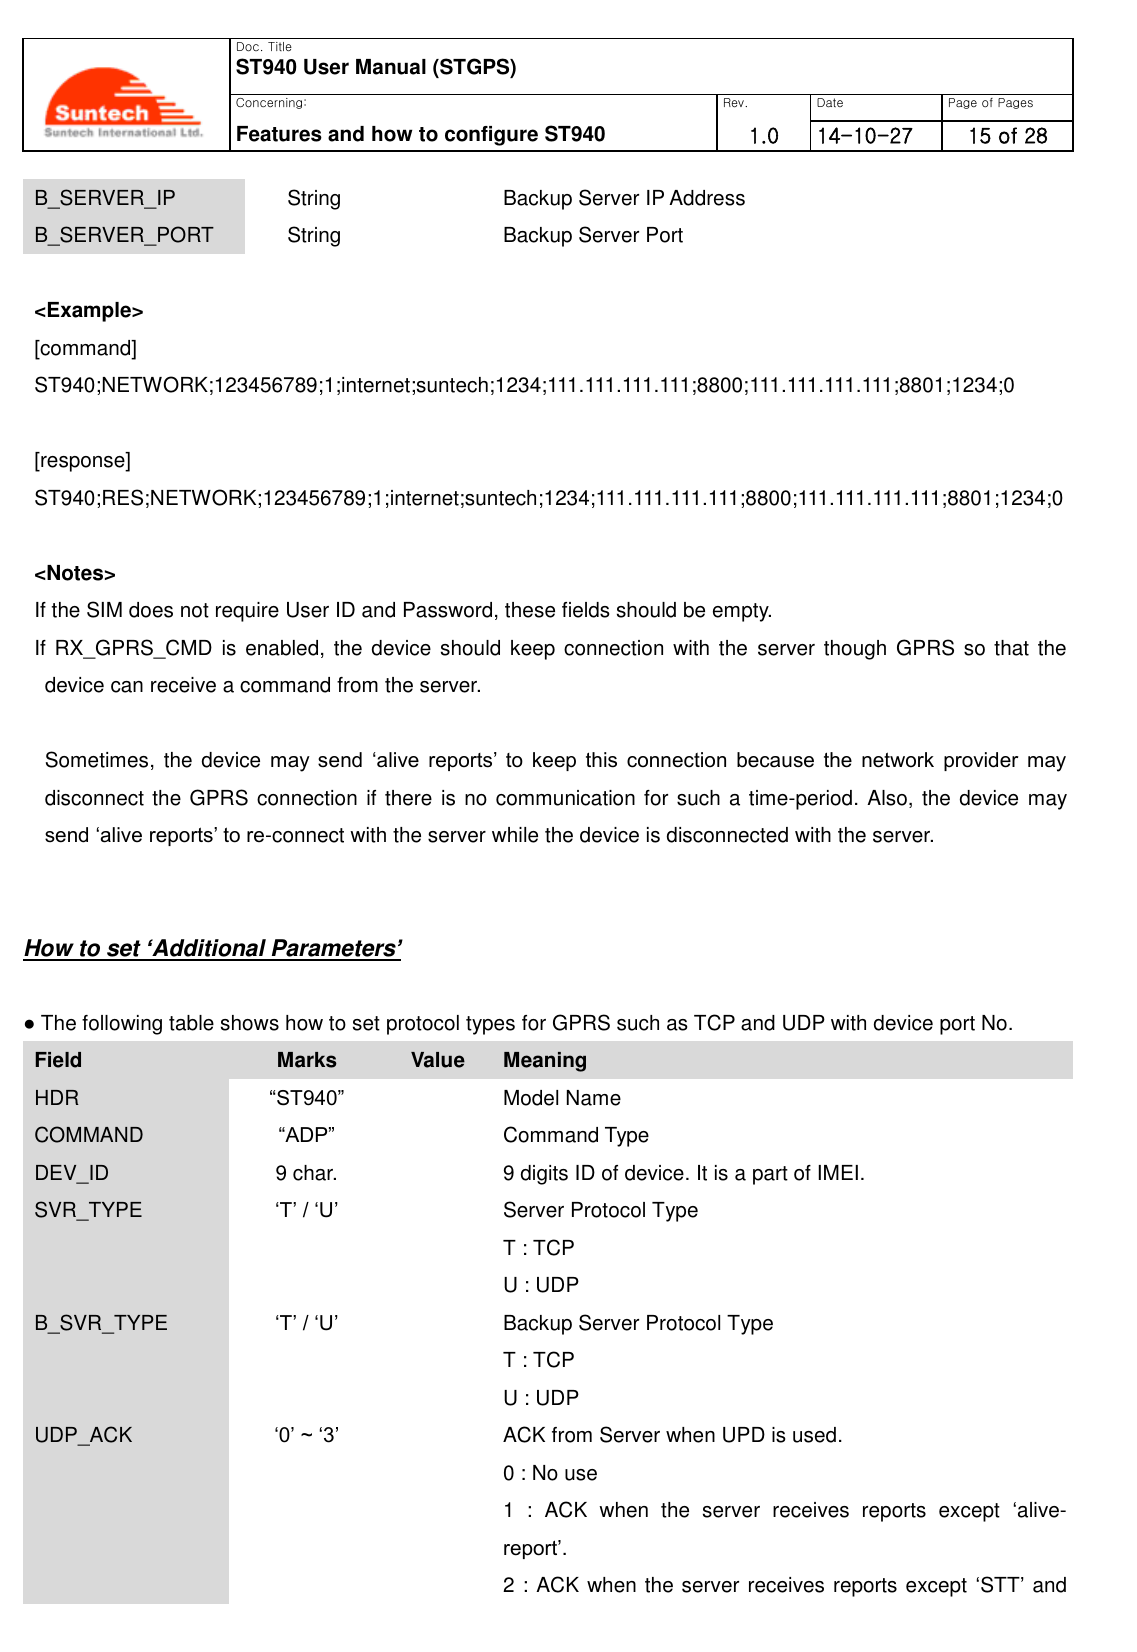   Doc. Title ST940 User Manual (STGPS) Concerning: Rev. Date Page of Pages Features and how to configure ST940 1.0 0      14-10-27 15 of 28  B_SERVER_IP String  Backup Server IP Address B_SERVER_PORT String  Backup Server Port  &lt;Example&gt; [command]   ST940;NETWORK;123456789;1;internet;suntech;1234;111.111.111.111;8800;111.111.111.111;8801;1234;0  [response]   ST940;RES;NETWORK;123456789;1;internet;suntech;1234;111.111.111.111;8800;111.111.111.111;8801;1234;0  &lt;Notes&gt; If the SIM does not require User ID and Password, these fields should be empty. If RX_GPRS_CMD  is enabled, the device should keep connection with the server though GPRS  so  that  the device can receive a command from the server.  Sometimes, the device  may  send  ‘alive  reports’  to  keep  this  connection  because  the  network  provider  may disconnect the GPRS connection if there is no communication for such a time-period. Also, the device may send ‘alive reports’ to re-connect with the server while the device is disconnected with the server.   How to set ‘Additional Parameters’  ● The following table shows how to set protocol types for GPRS such as TCP and UDP with device port No. Field Marks Value Meaning HDR “ST940”  Model Name COMMAND “ADP”  Command Type DEV_ID 9 char.  9 digits ID of device. It is a part of IMEI. SVR_TYPE    ‘T’ / ‘U’     Server Protocol Type   T : TCP   U : UDP B_SVR_TYPE    ‘T’ / ‘U’     Backup Server Protocol Type   T : TCP   U : UDP   UDP_ACK    ‘0’ ~ ‘3’     ACK from Server when UPD is used.   0 : No use   1  :  ACK  when  the  server  receives  reports  except  ‘alive-report’. 2 : ACK when the server receives reports except ‘STT’ and 